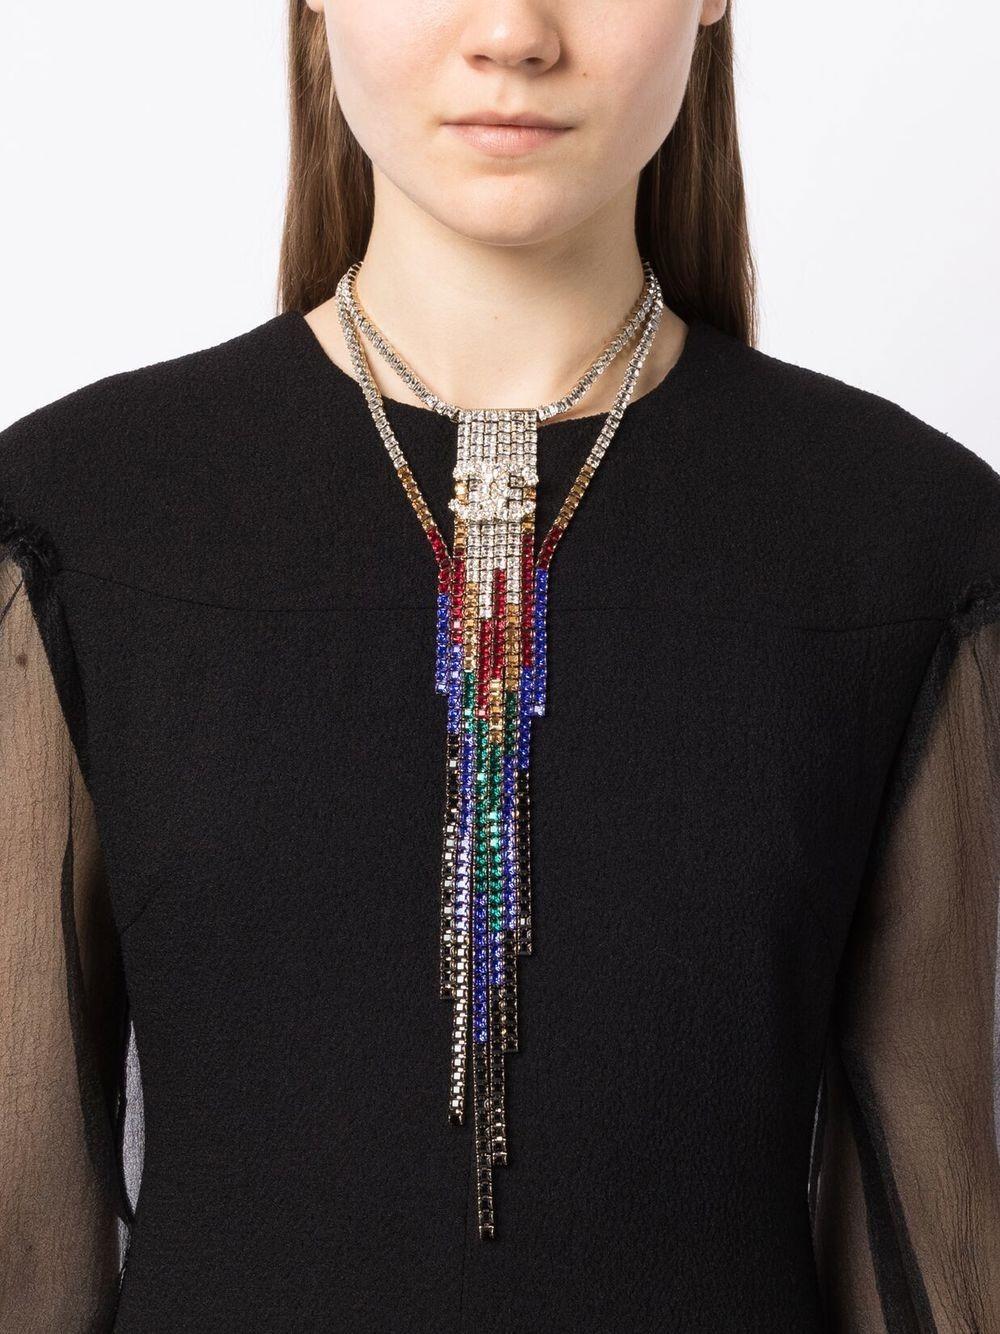 Set in the Temple of Dendur at the Metropolitan Museum of Art in New York City, the Chanel Pre-Fall 2019 runway was a chic mash-up of Ancient Egypt and New York. This rainbow drop statement necklace is artfully embellished with multicoloured